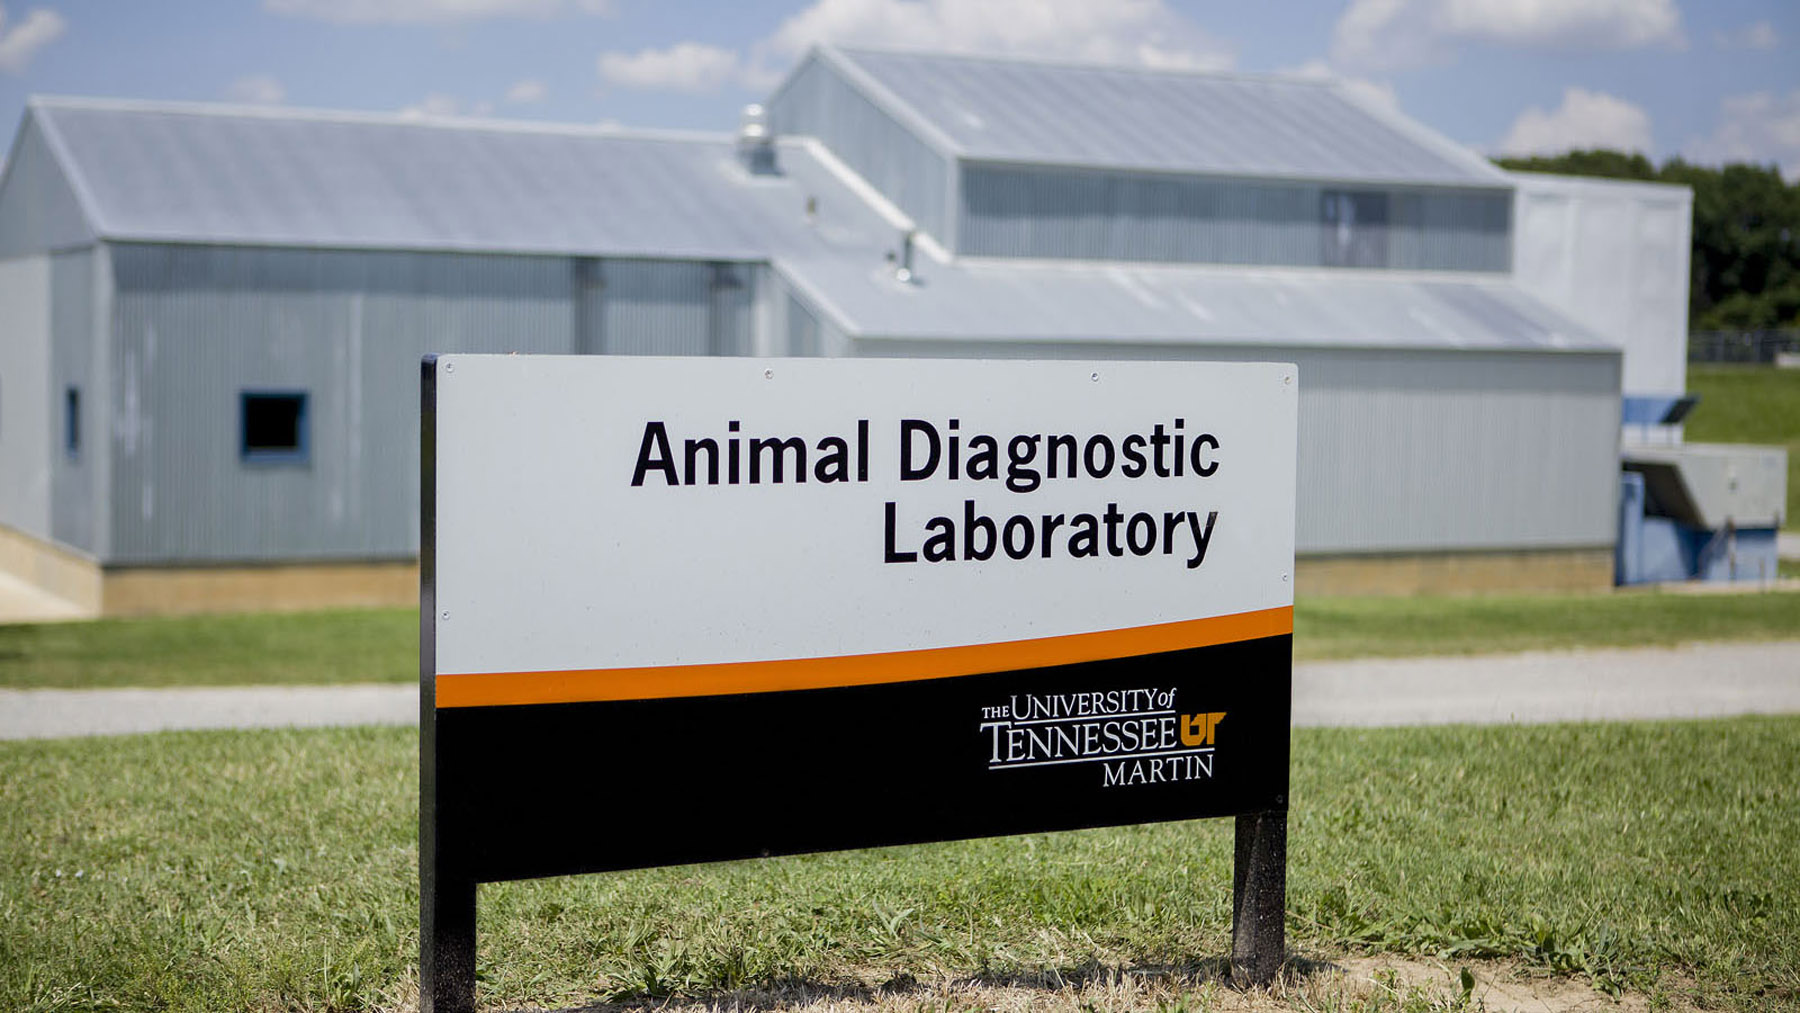 The University of Tennessee at Martin also houses the West Tennessee Animal Disease Diagnostic Laboratory, which performs necropsies and diagnostics for food and fiber producers, and pet owners of West Tennessee.